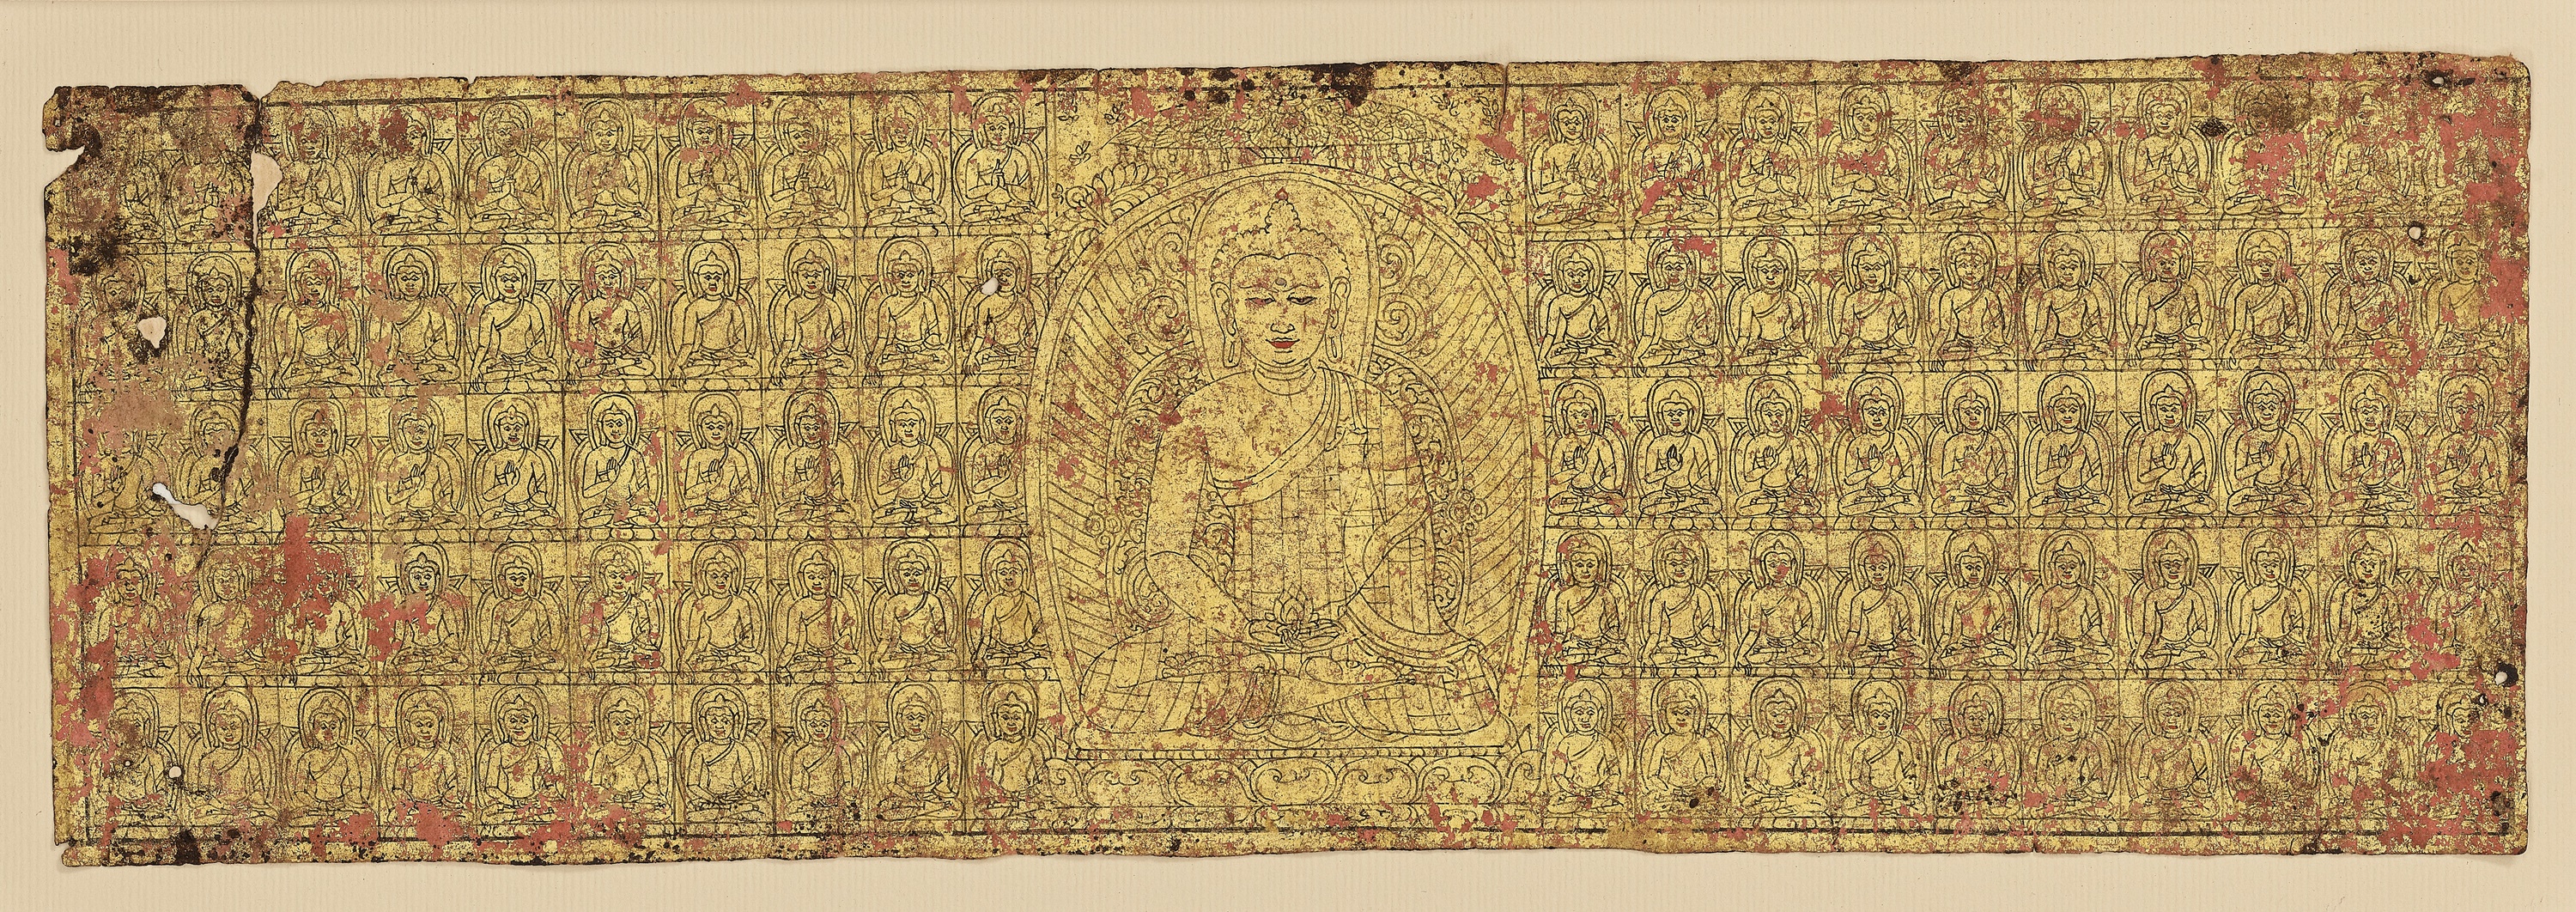 A PAINTED 'HUNDRED BUDDHAS' MANUSCRIPT FRONT PAGE